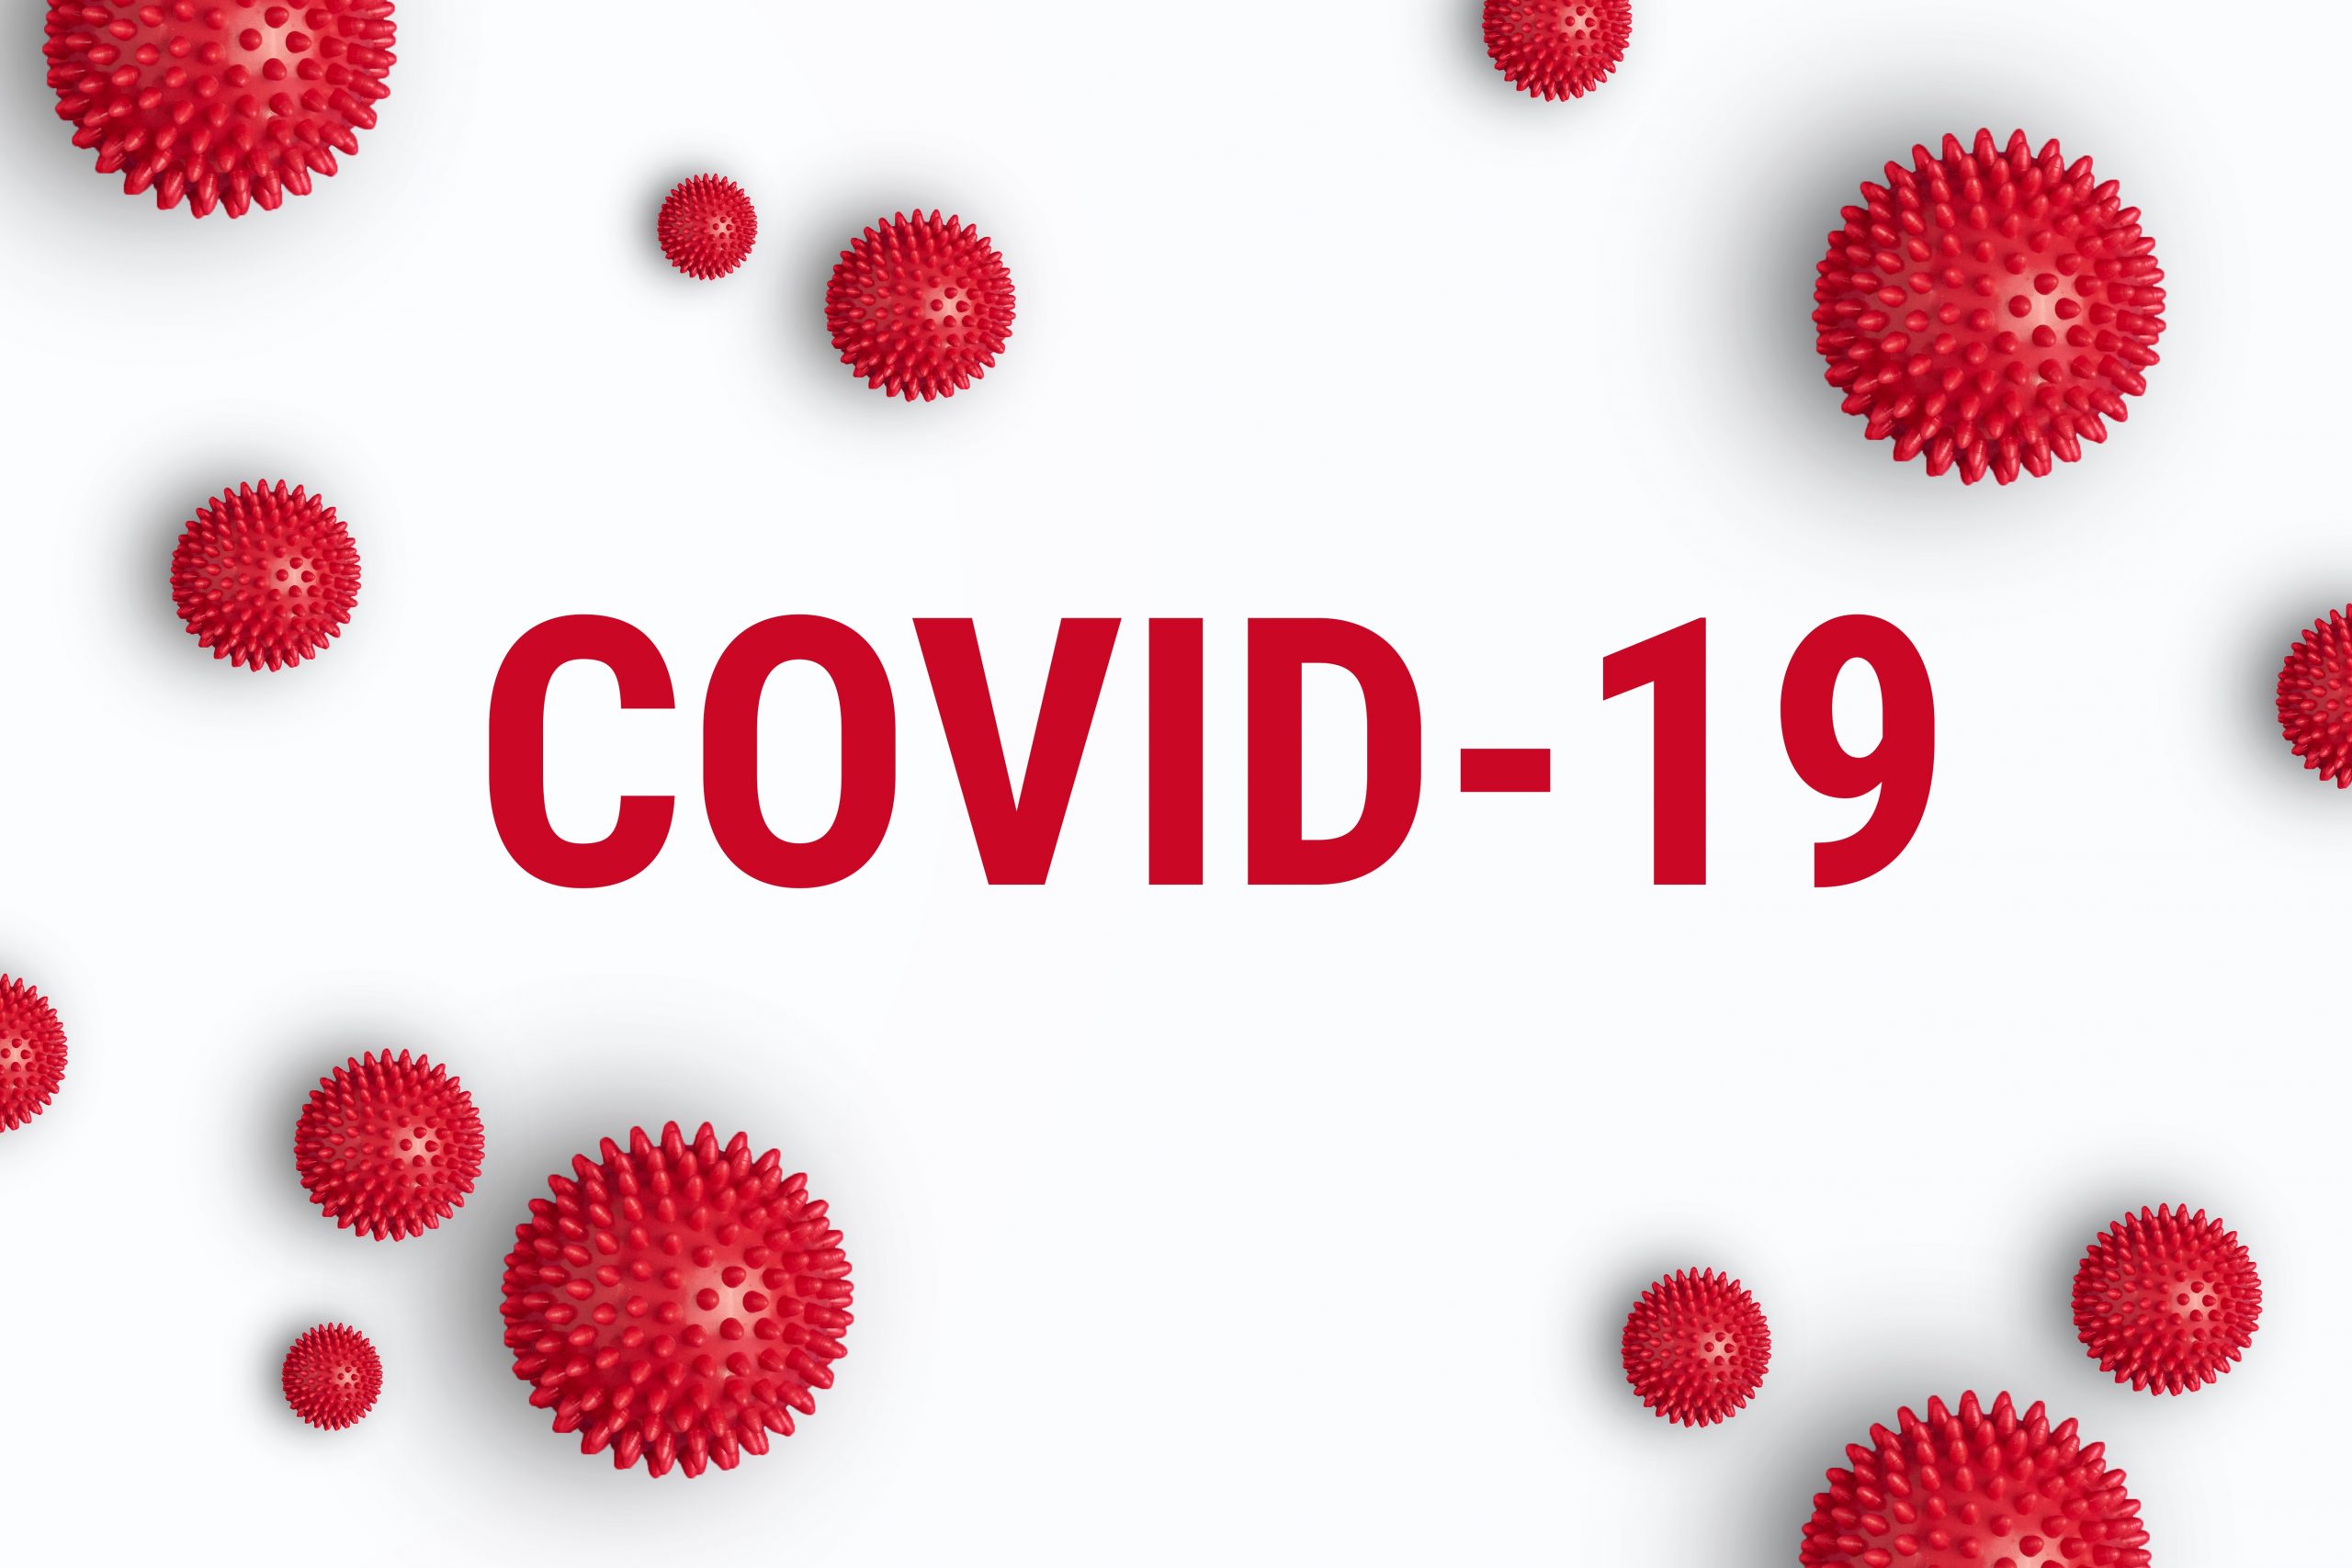 Social Distancing and Covid-19